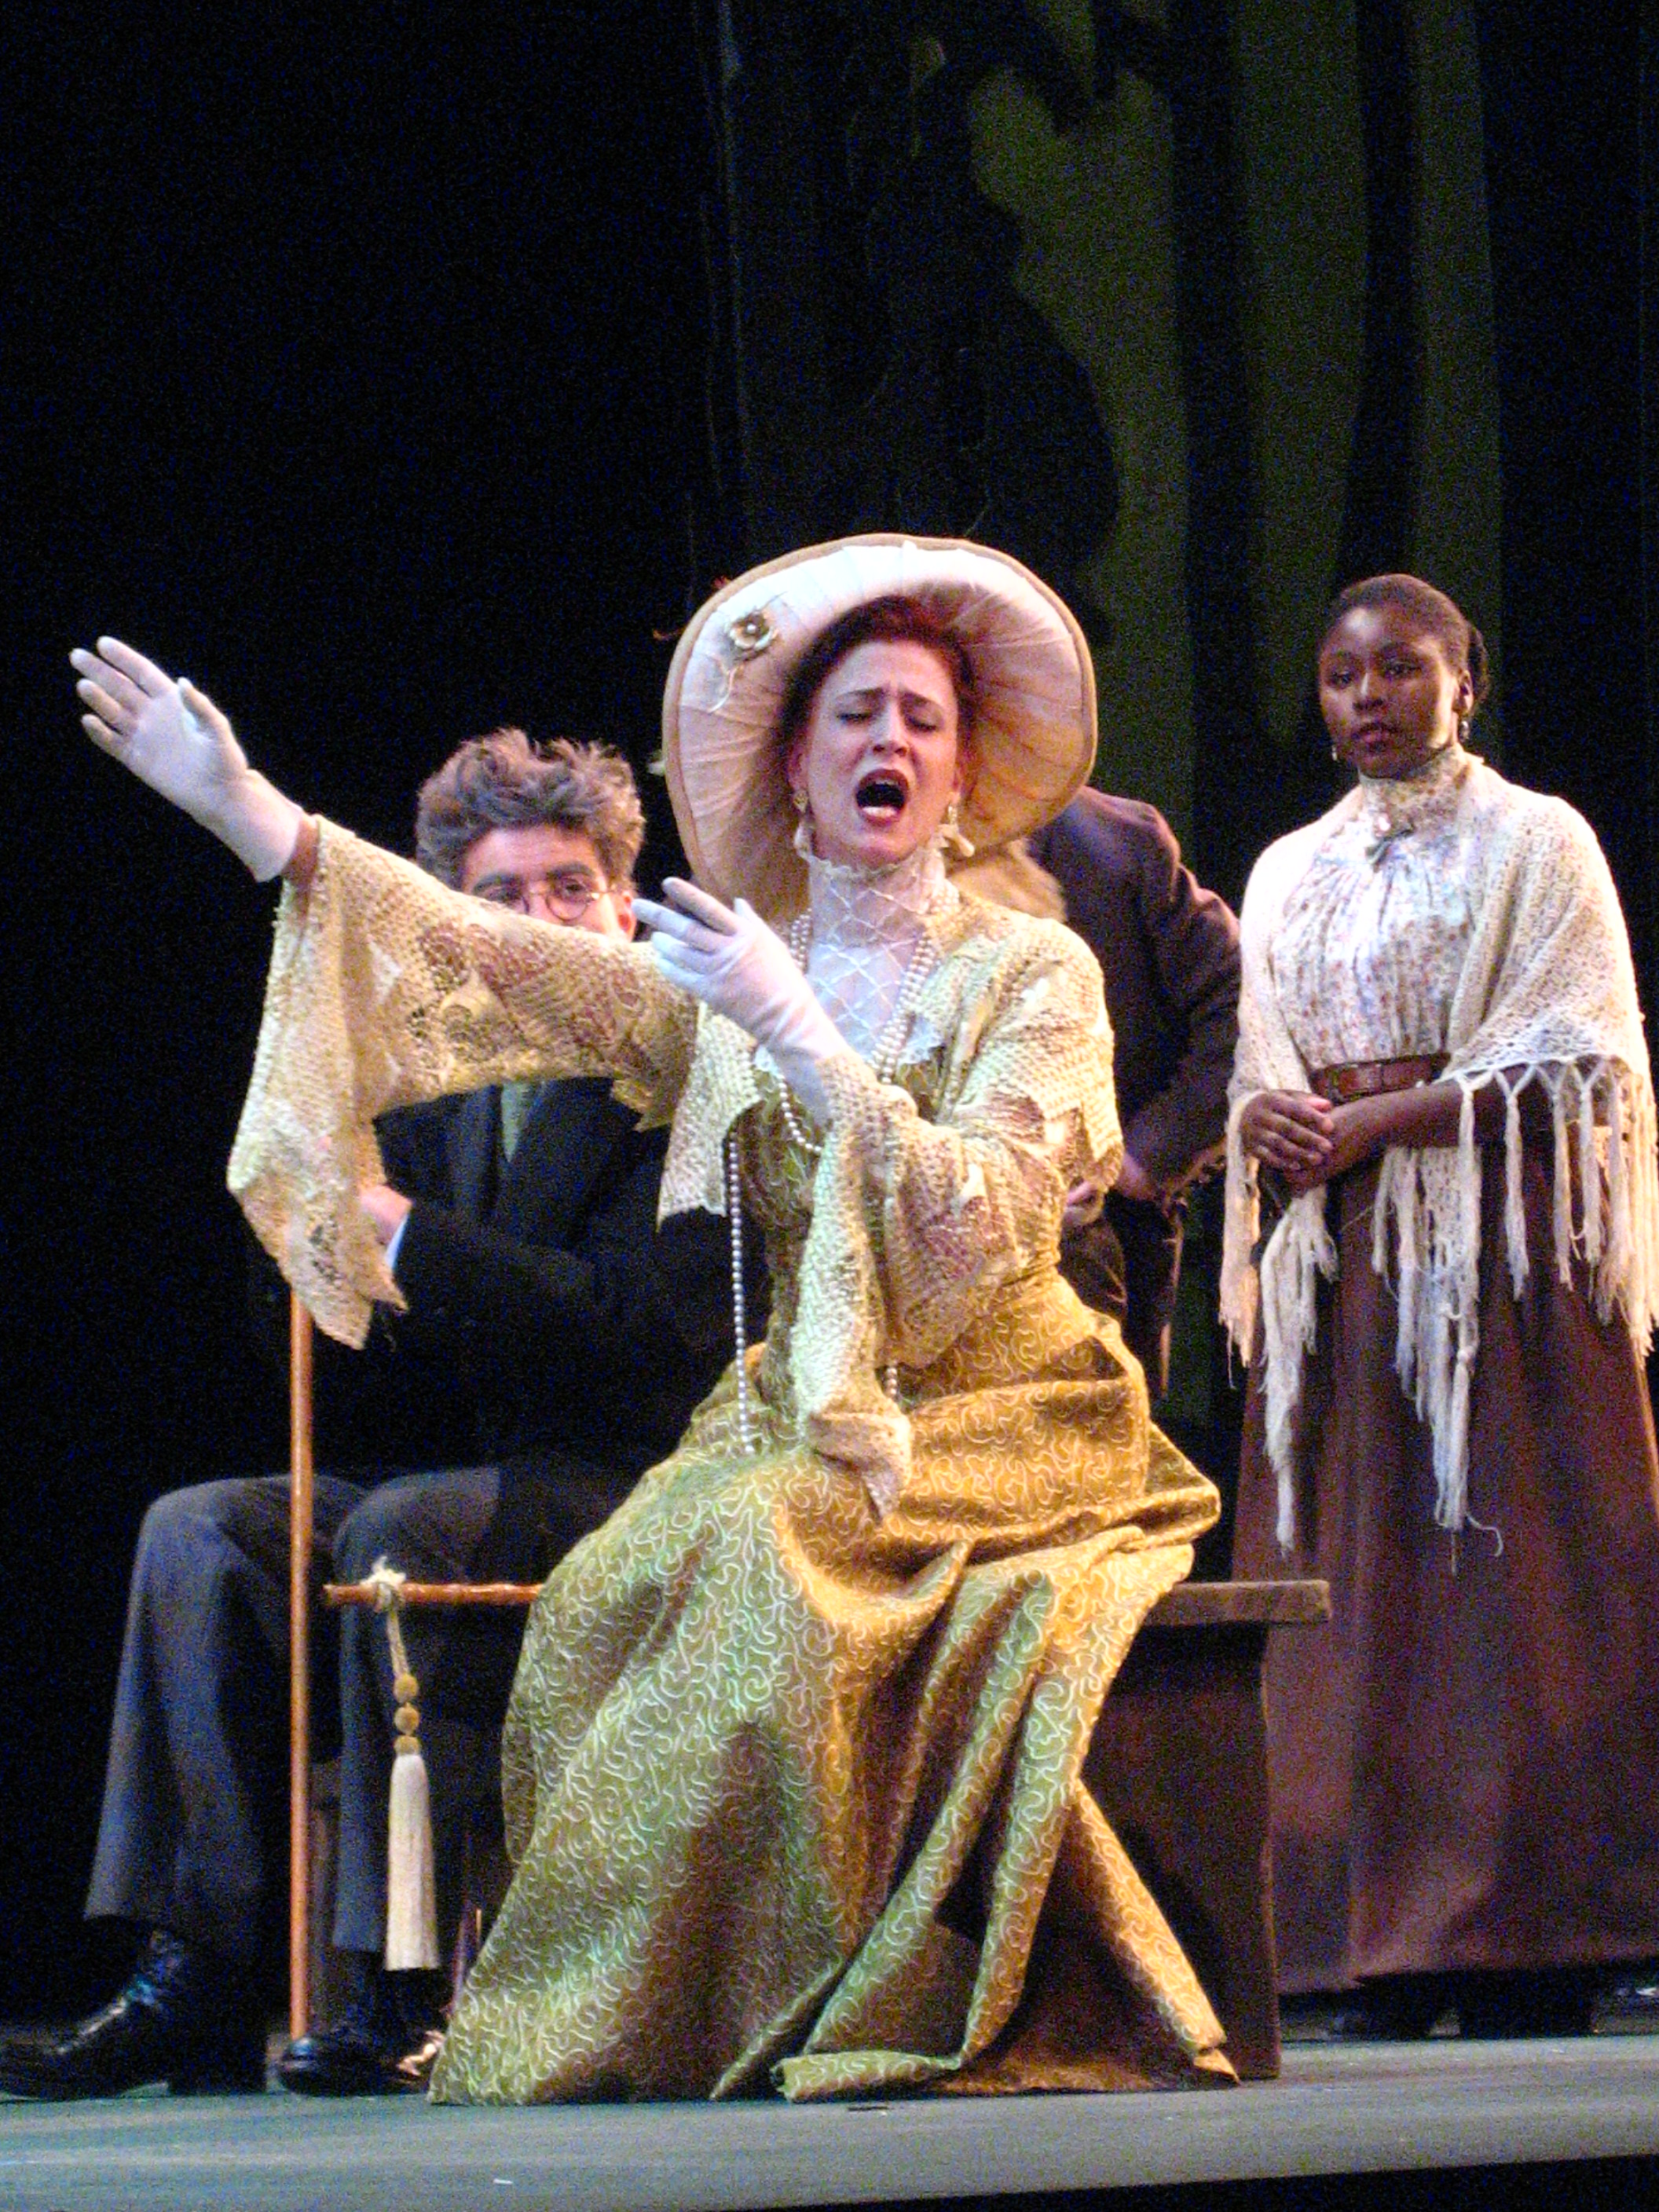 On stage as Arkandina in Checkov's The Seagull at Southern Methodist University during my MFA study.